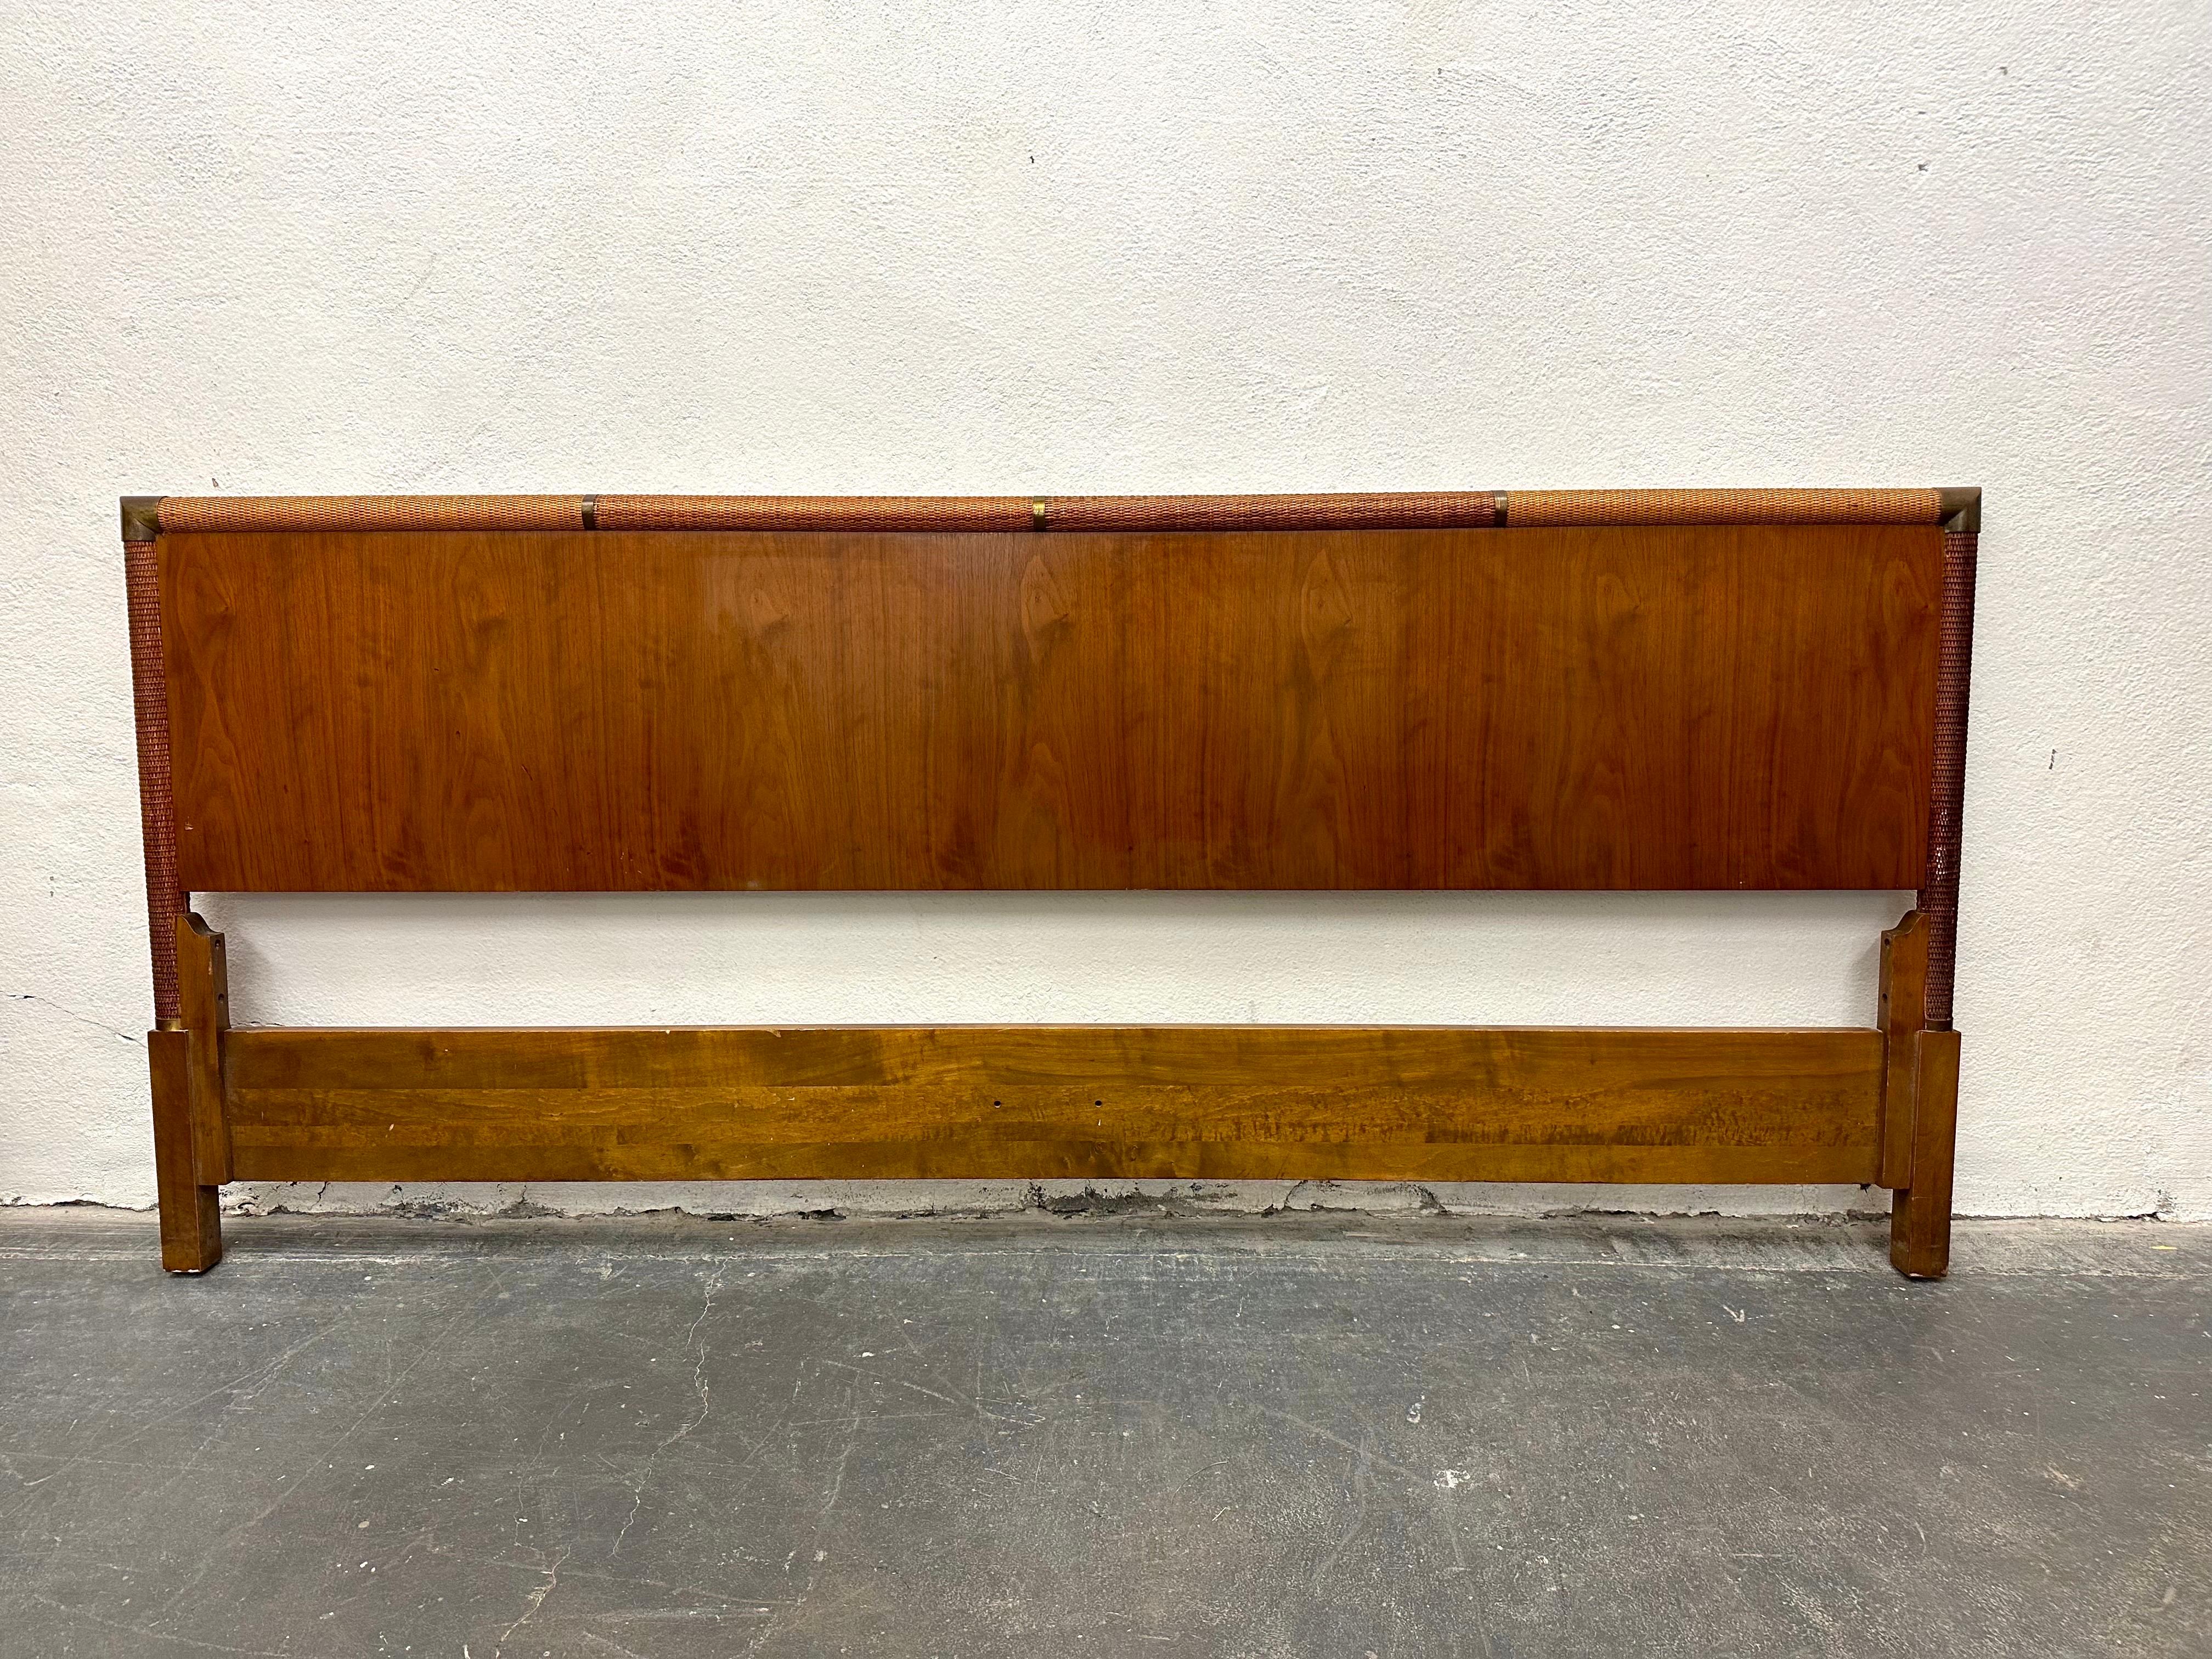 Beautiful Robsjohn-Gibbings for Widdicomb king-sized bed headboard.  Walnut and brass with raffia caning. Can easily fit any bed frame.  